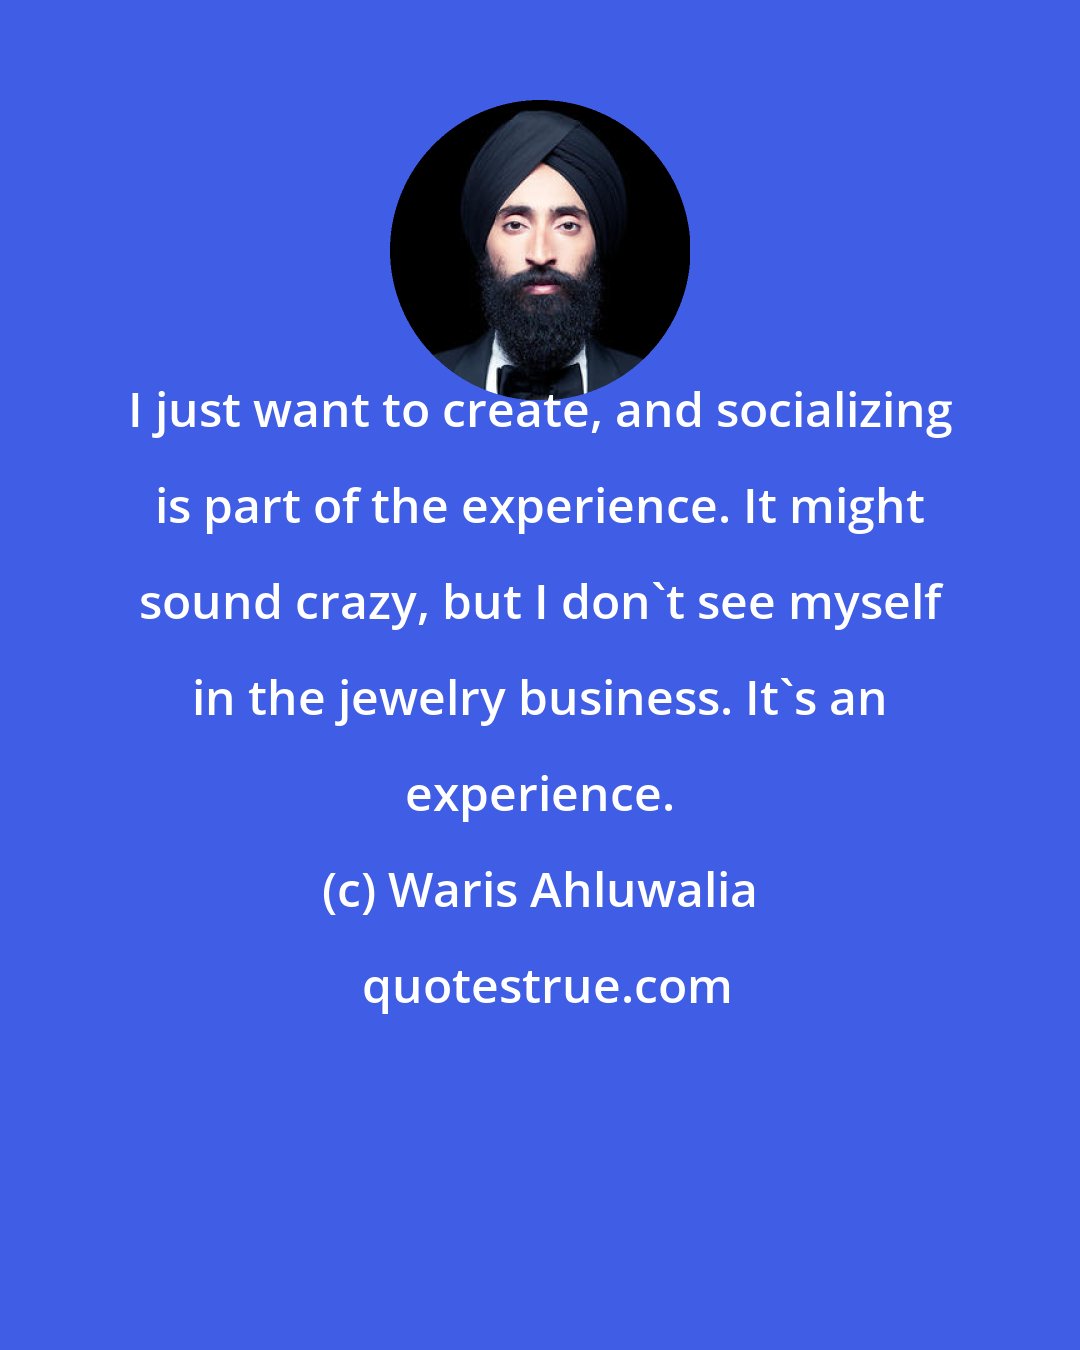 Waris Ahluwalia: I just want to create, and socializing is part of the experience. It might sound crazy, but I don't see myself in the jewelry business. It's an experience.